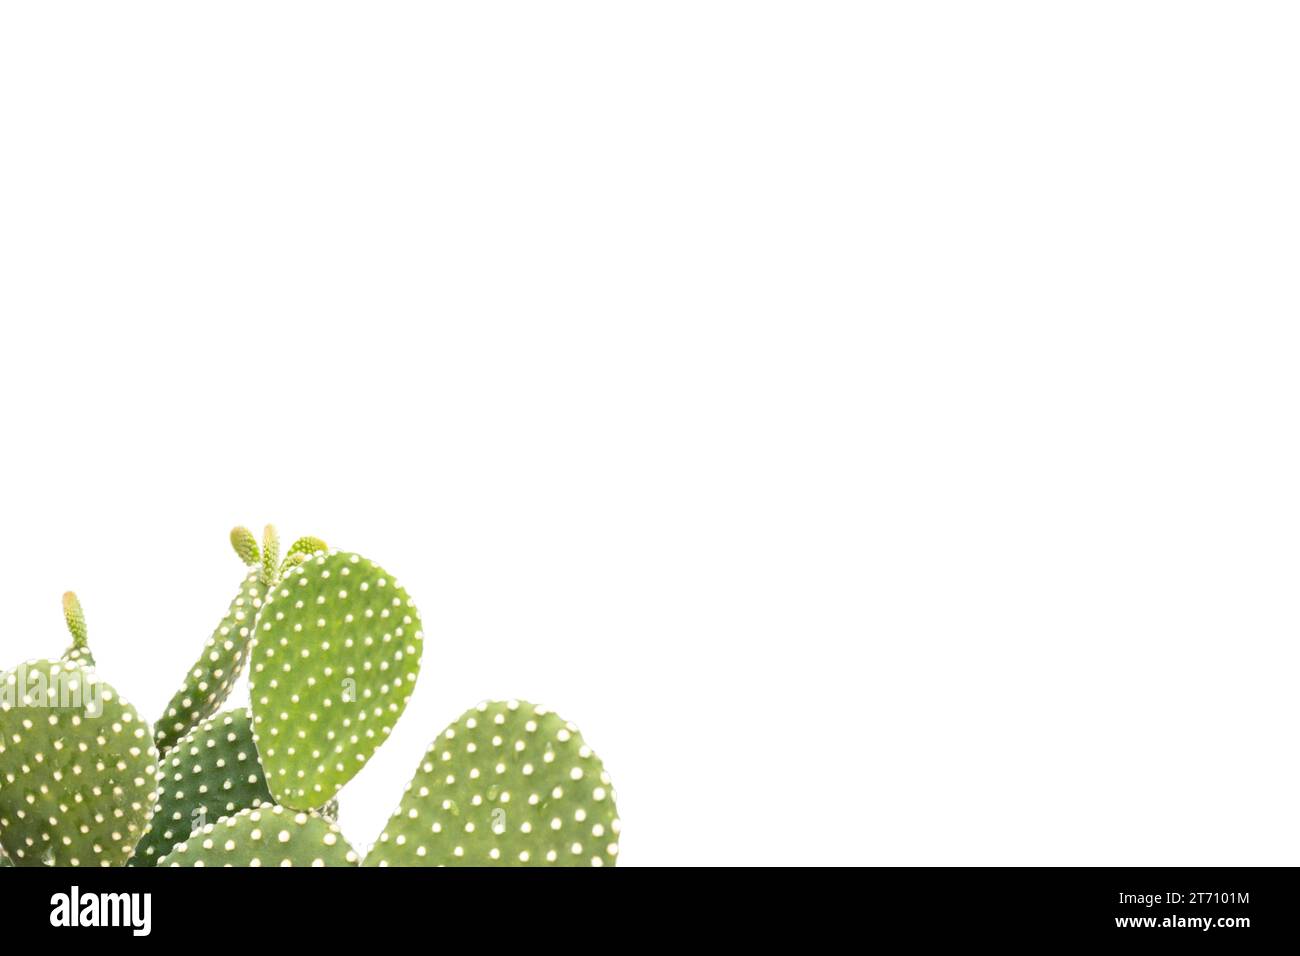 Opuntia microdasys white prickly pear cactus with empty space for text Stock Photo